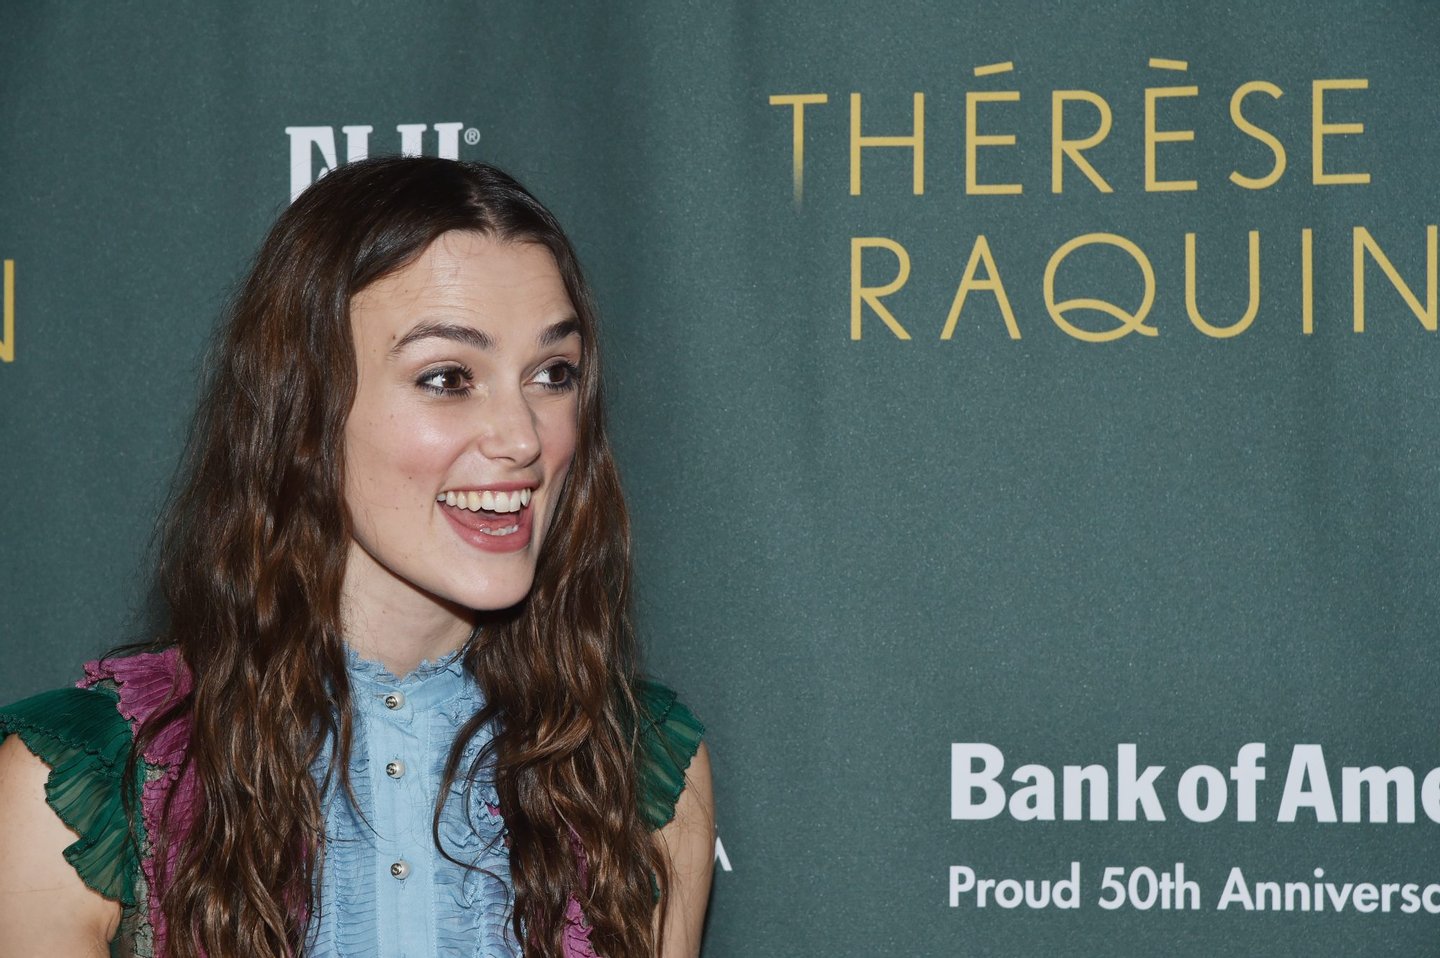 NEW YORK, NY - OCTOBER 29: Actress Keira Knightley attends "Therese Raquin" Broadway Opening Night at Studio 54 on October 29, 2015 in New York City. (Photo by Mike Coppola/Getty Images)